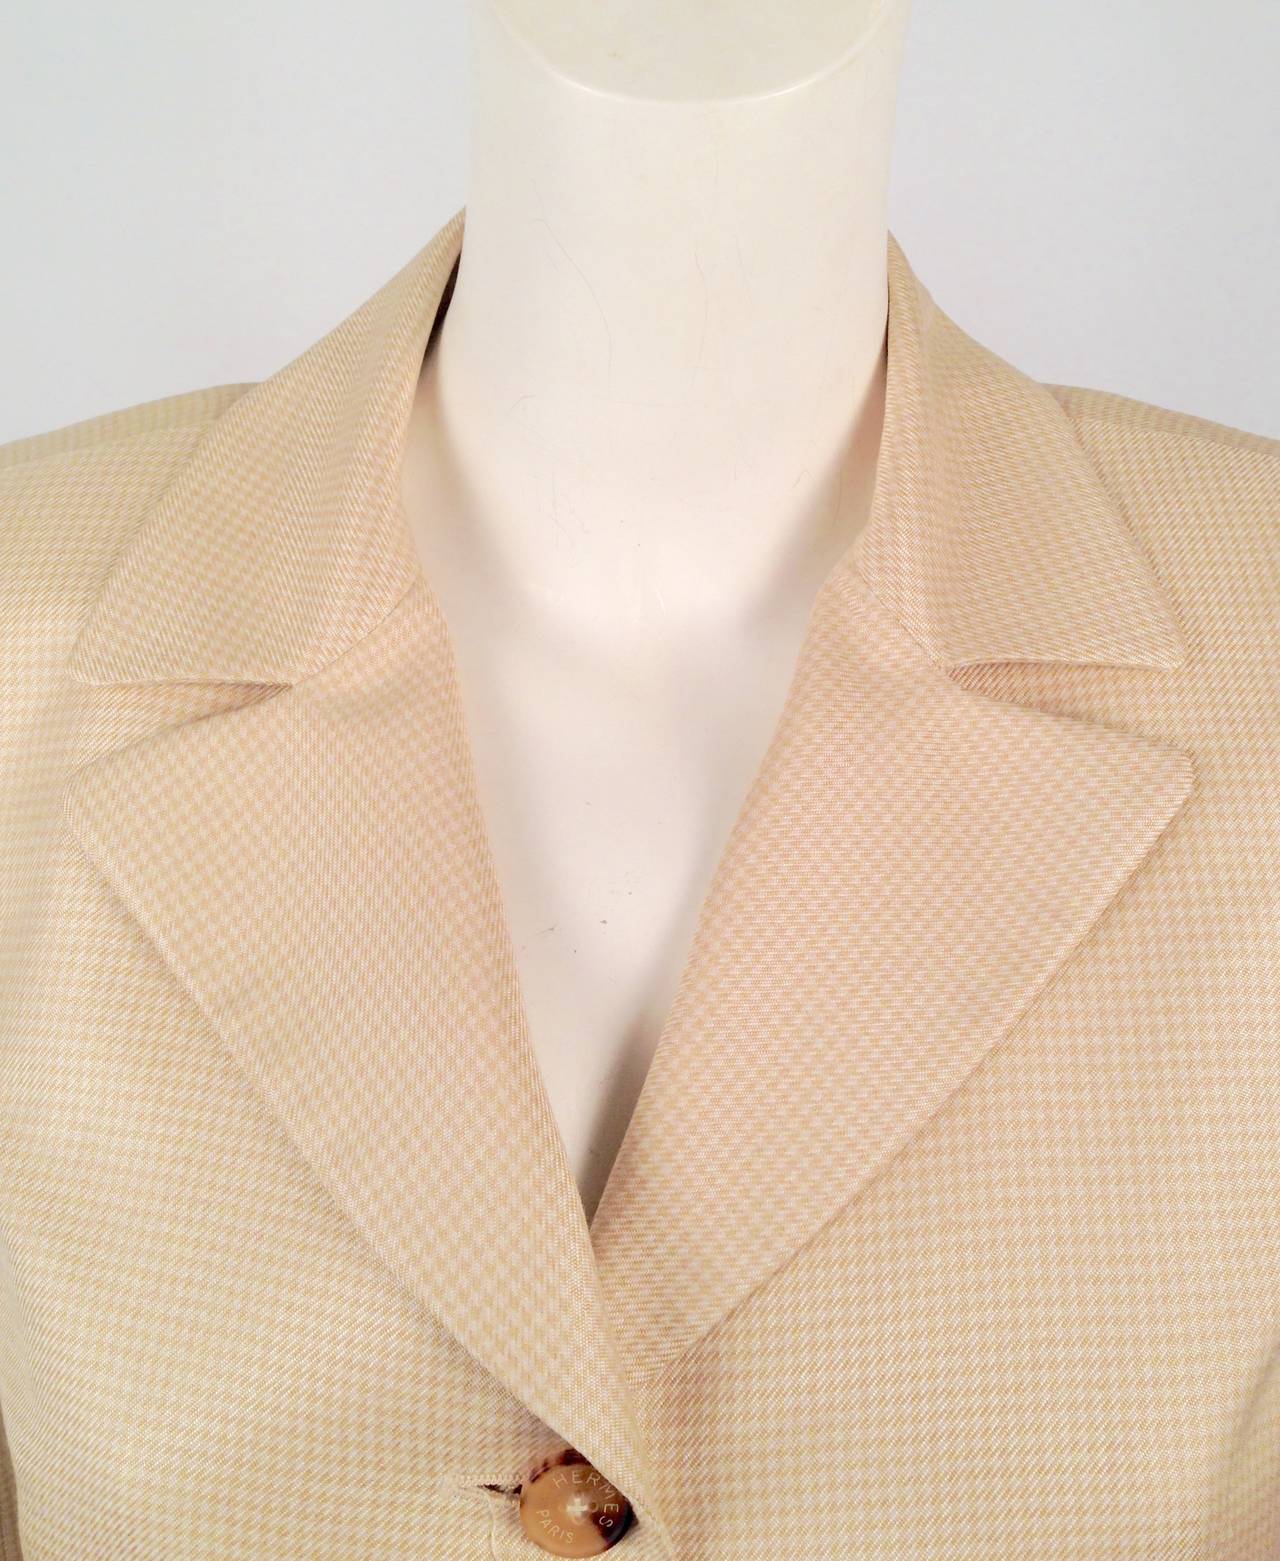 Hermès 100% Silk Houndstooth Equestrian-Inspired Jacket In Excellent Condition For Sale In Palm Beach, FL